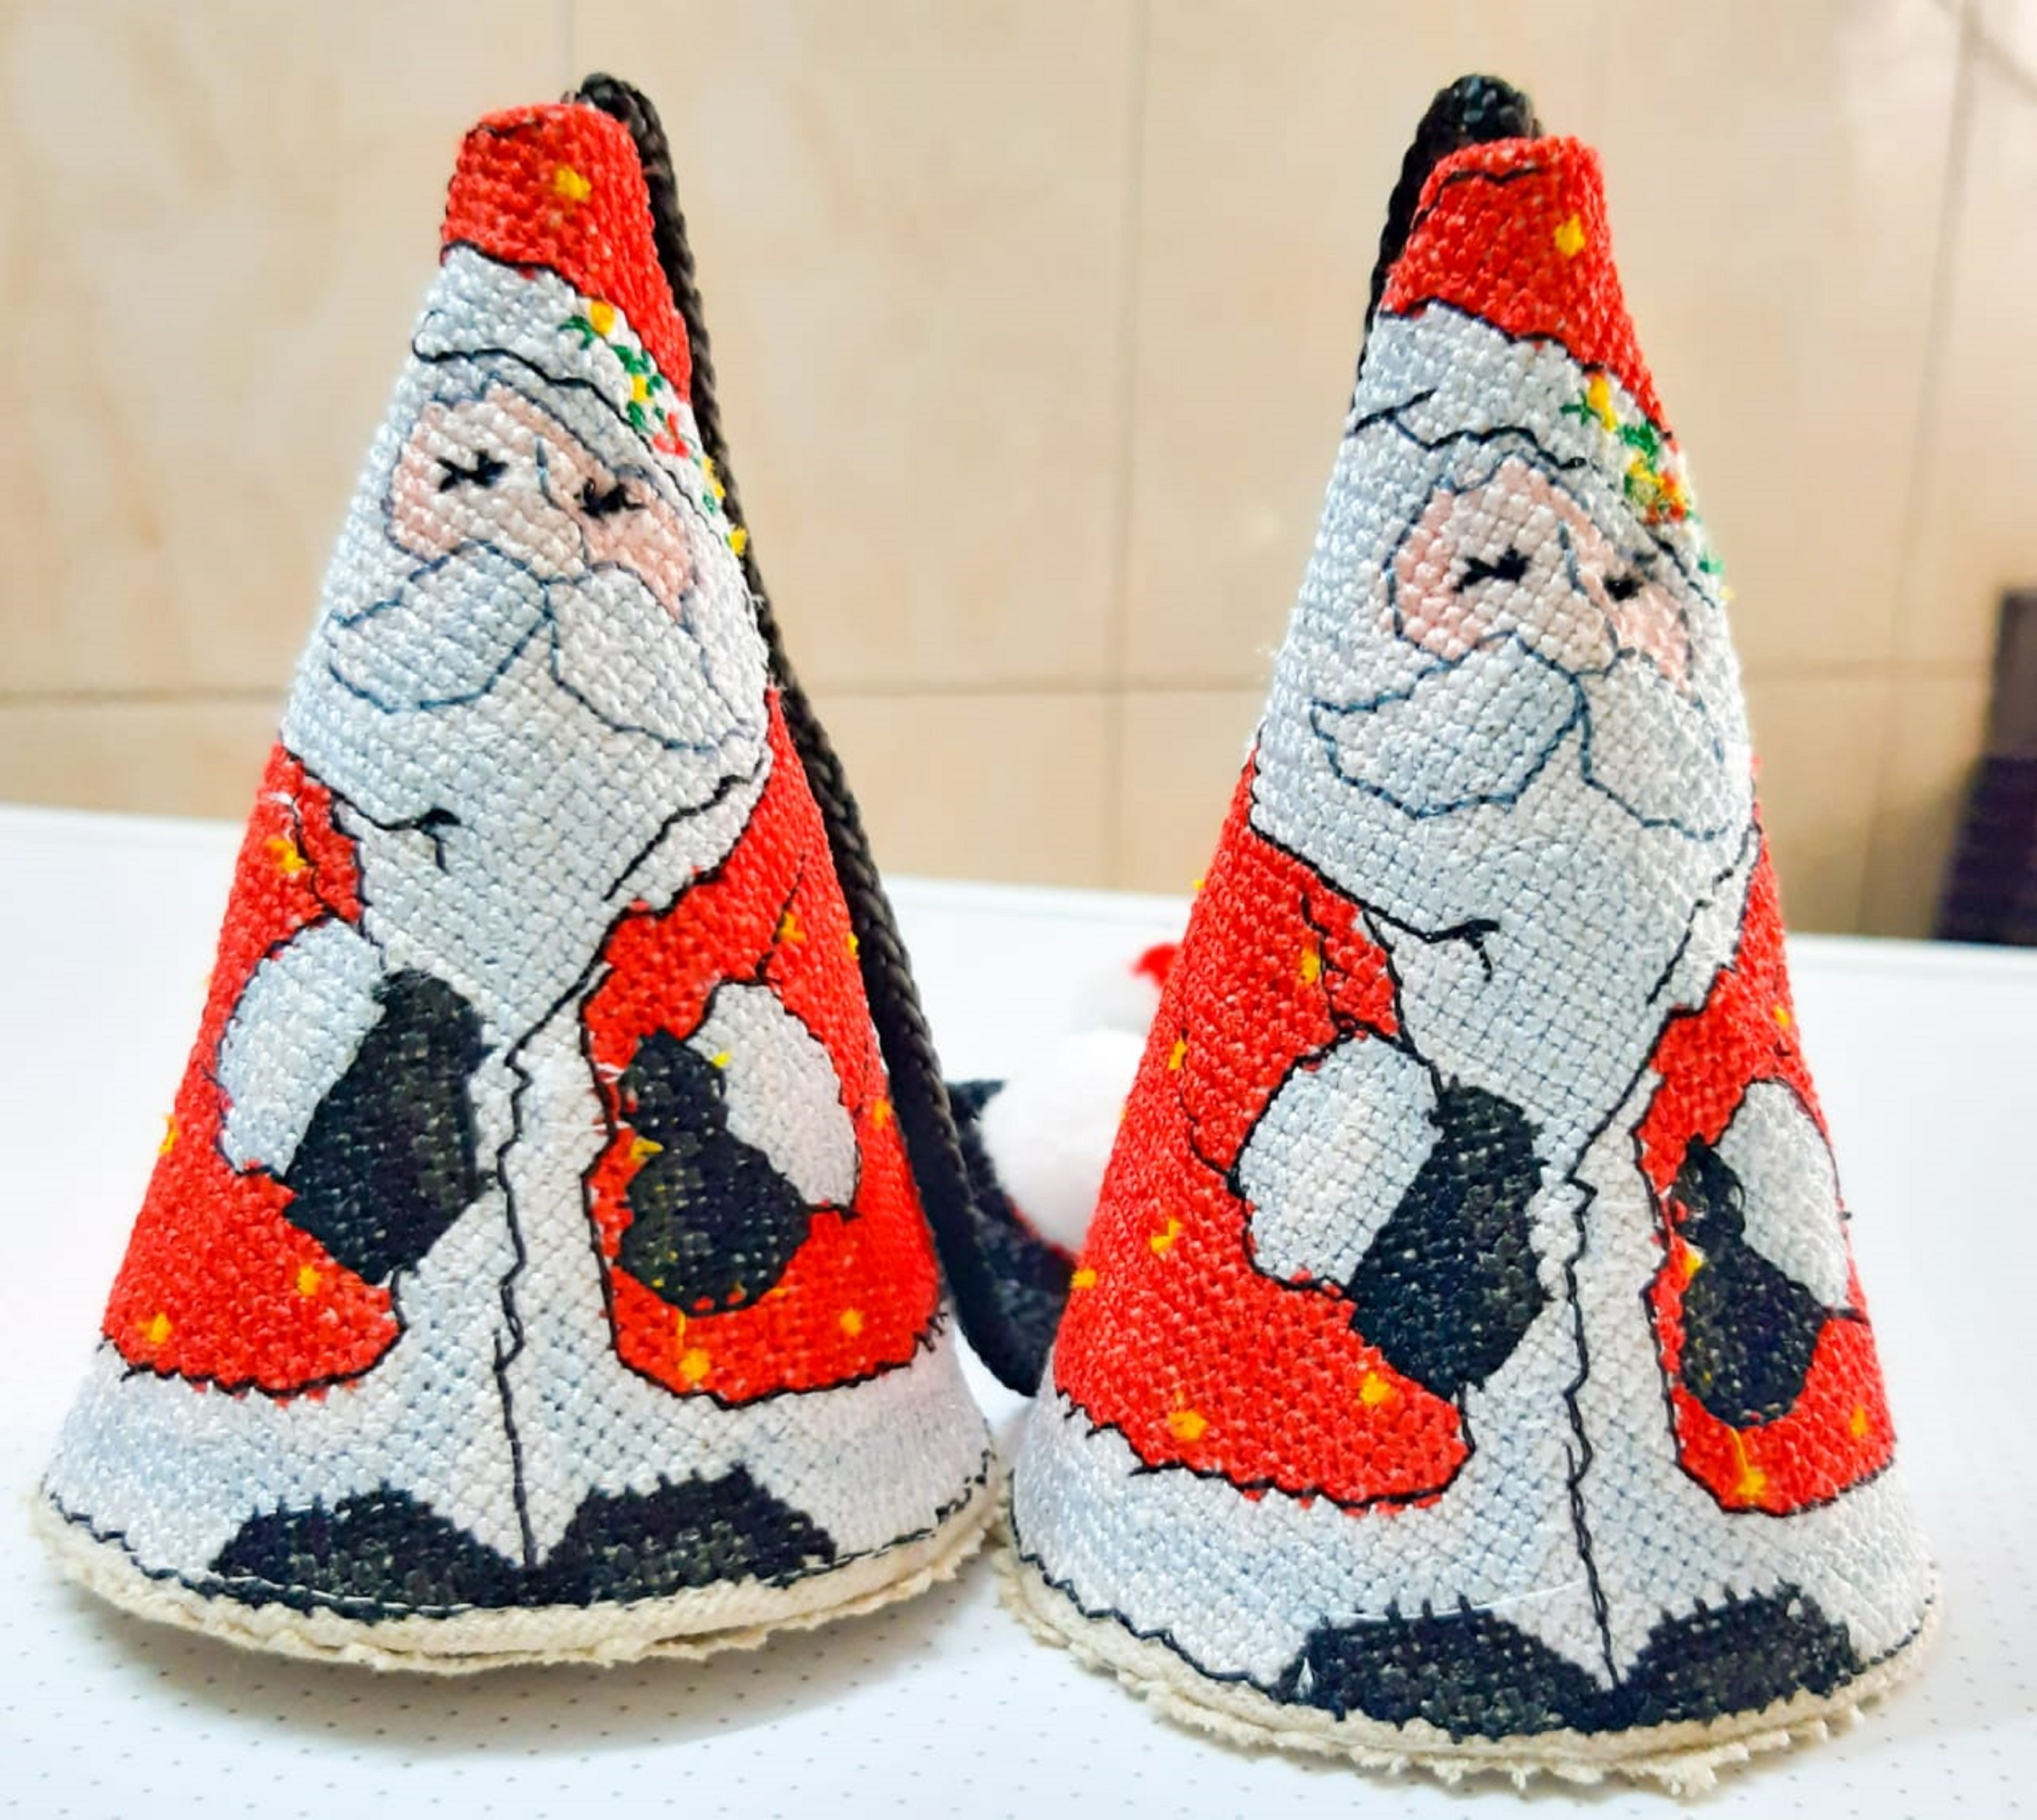 Santa Christmas ornament set, Embroidered conical danglers, Handmade holiday décor and gifts for Christmas and home.